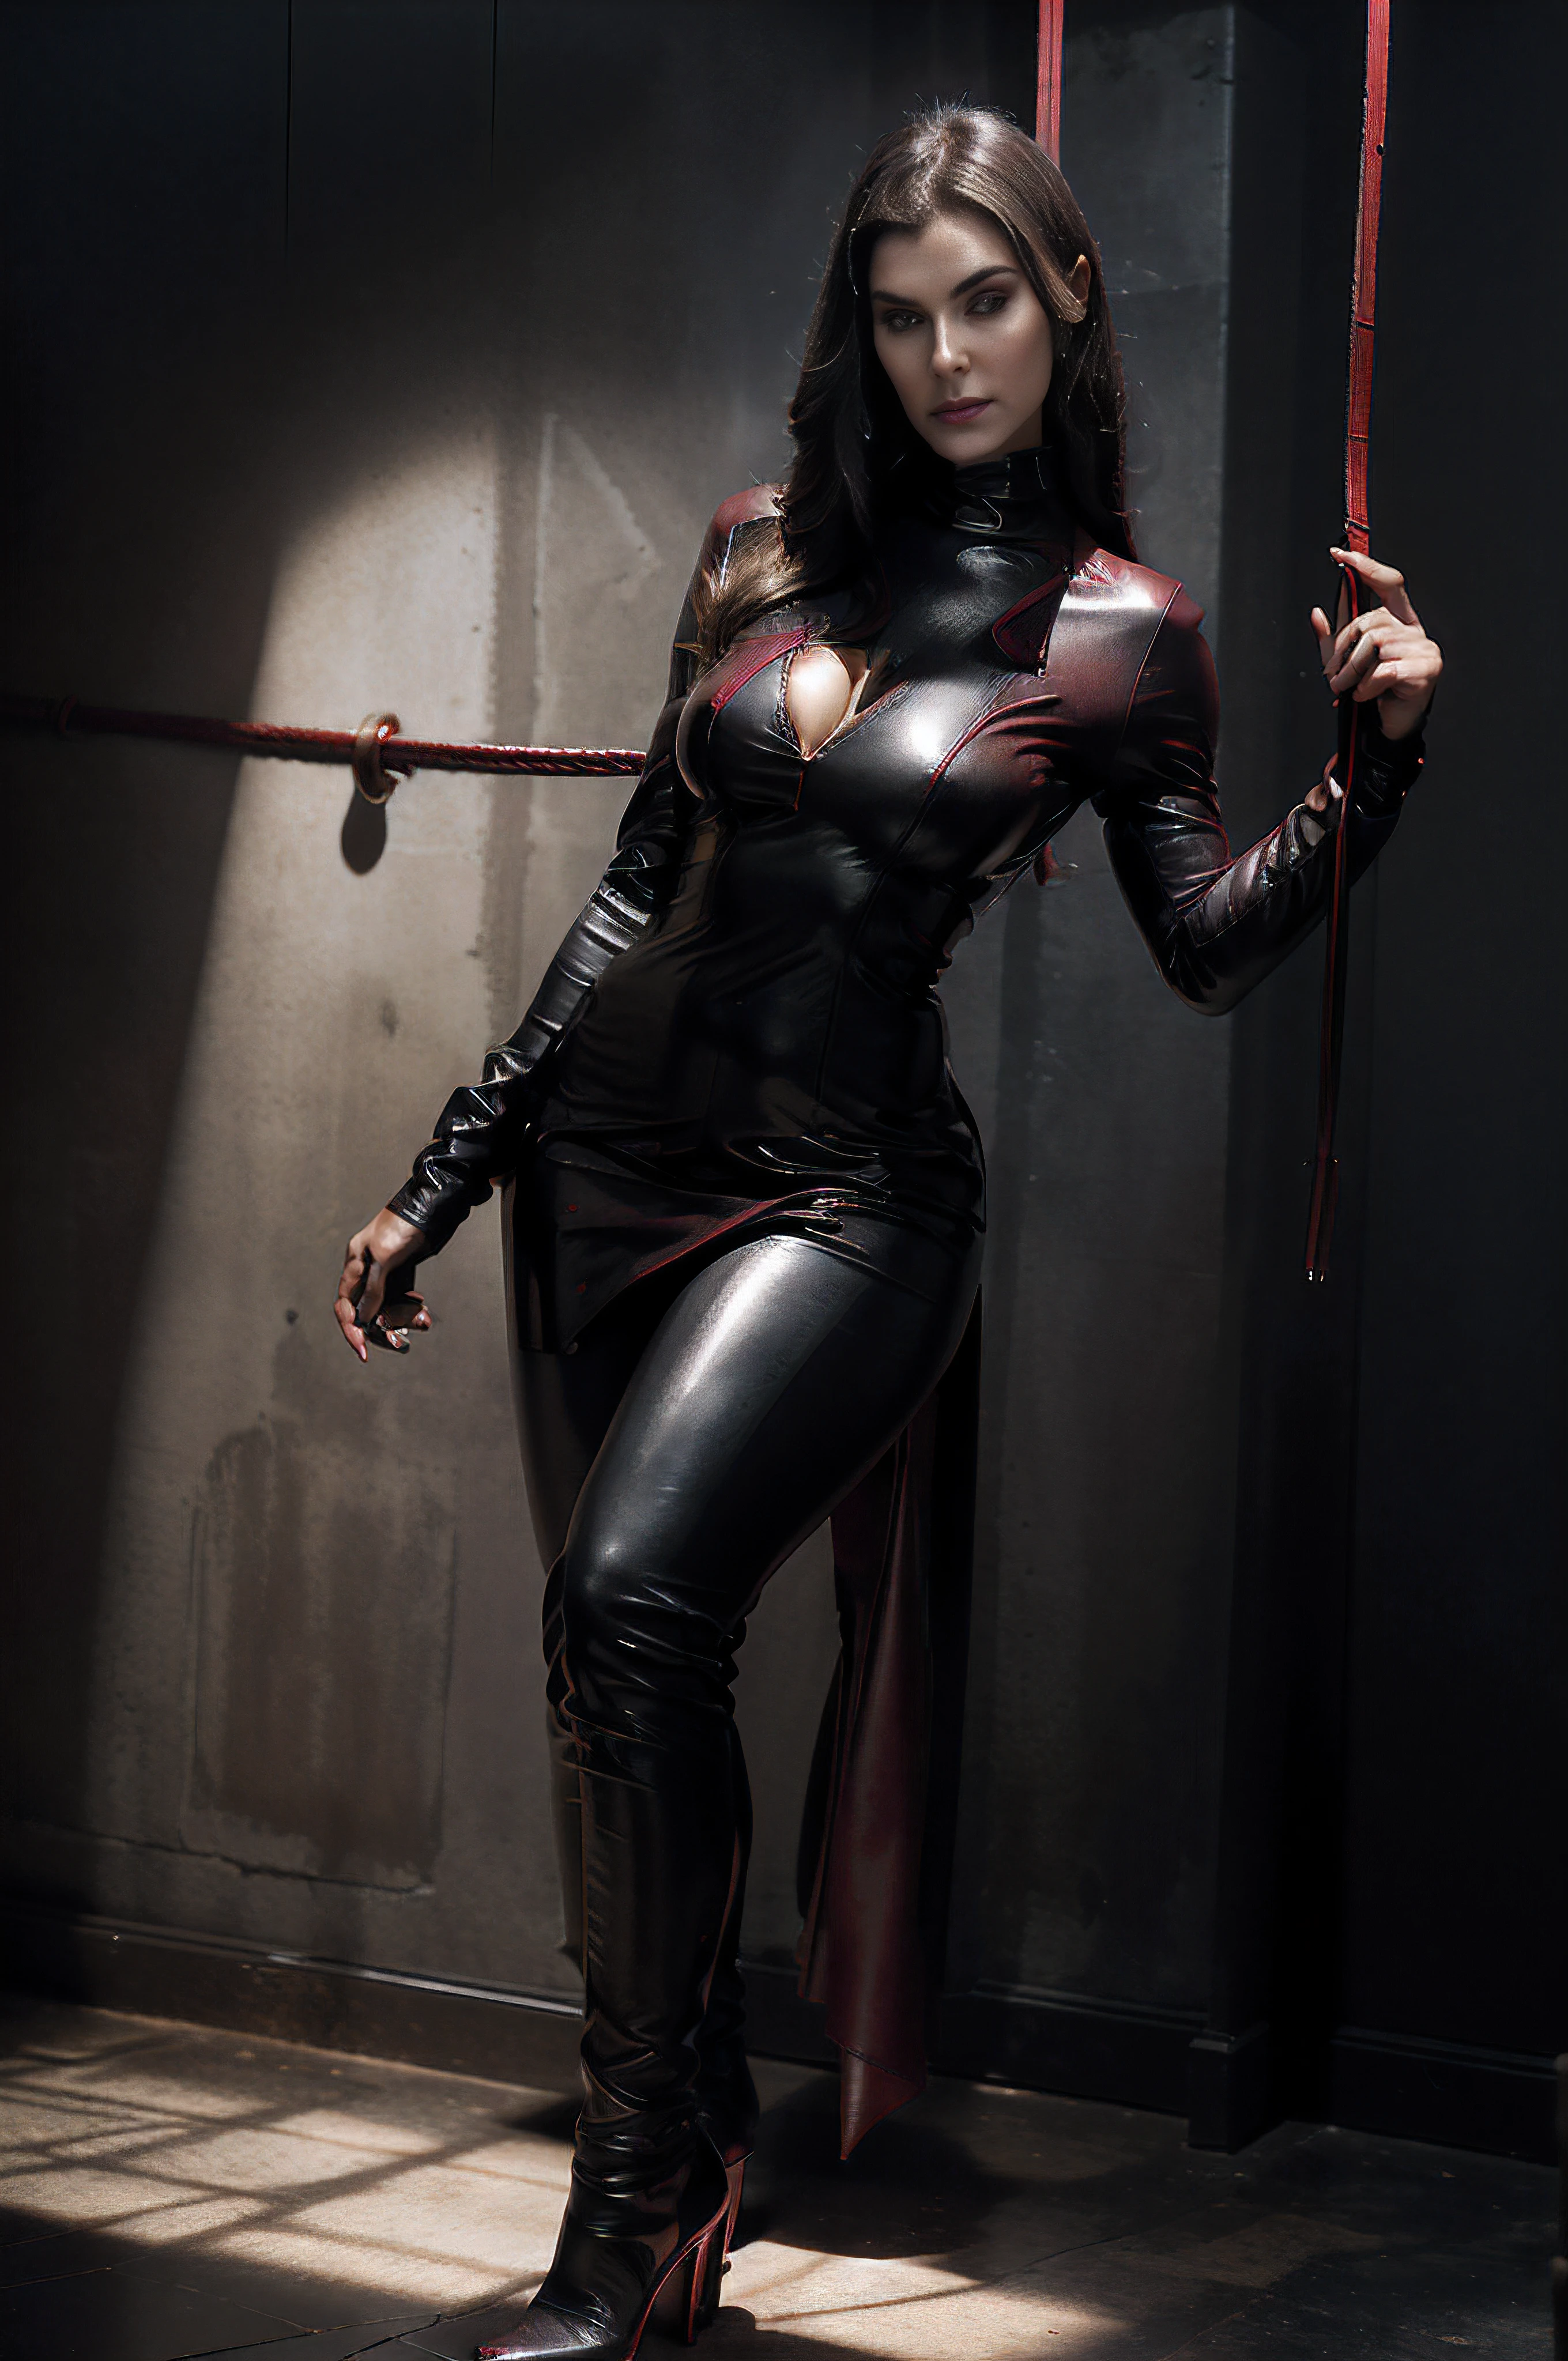 a girl in a (red leather outfit, with a (((black whip held up in air in her hand)))), (confidently cracking the whip in the air), leather gloves glimmering in the light, high heels emphasizing her powerful and seductive presence, standing in a dimly lit dungeon filled with chains, the sound of the whip echoing with every crack, creating an aura of dominance and seduction, leather-clad dominatrix, red latex cat suit, nail design,pleasure and pain,intense gaze piercing through viewer,, a provocative and mysterious atmosphere, a play of shadows and highlights, dramatic lighting emphasizing her curves, shades of black and red dominating the scene, a mix of power and sensuality, body language oozing authority, a sense of control and mastery, strong and fierce, ready to take charge.(aesthetic portrait),((dark,moody,atmospheric),(dramatic lighting),(gloomy atmosphere),(subdued colors),(detailed textures),red candle light,bondage equipment,red velvet),leather restrain (quality, 4k, highres, powerful:1.2), ultra-detailed, (realistic:1.37), TeeTee2